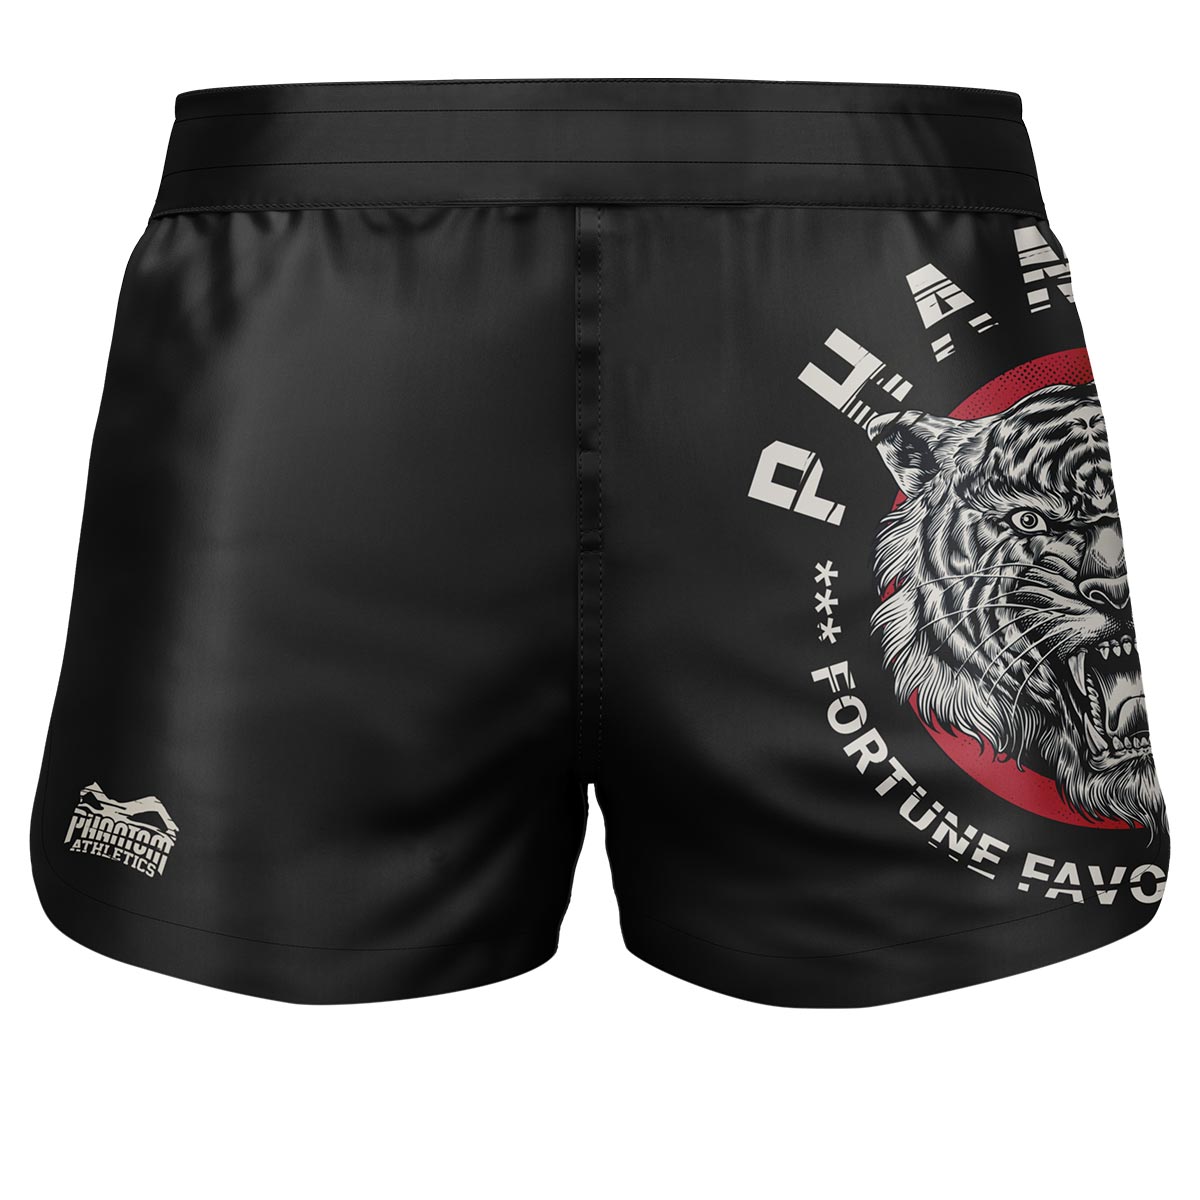 Phantom Fightshorts Fusion 2in1. Ultimate shorts for your martial arts. Ideal for MMA, Muay Thai, BJJ, wrestling and more. In black with our popular Tiger Unit design.